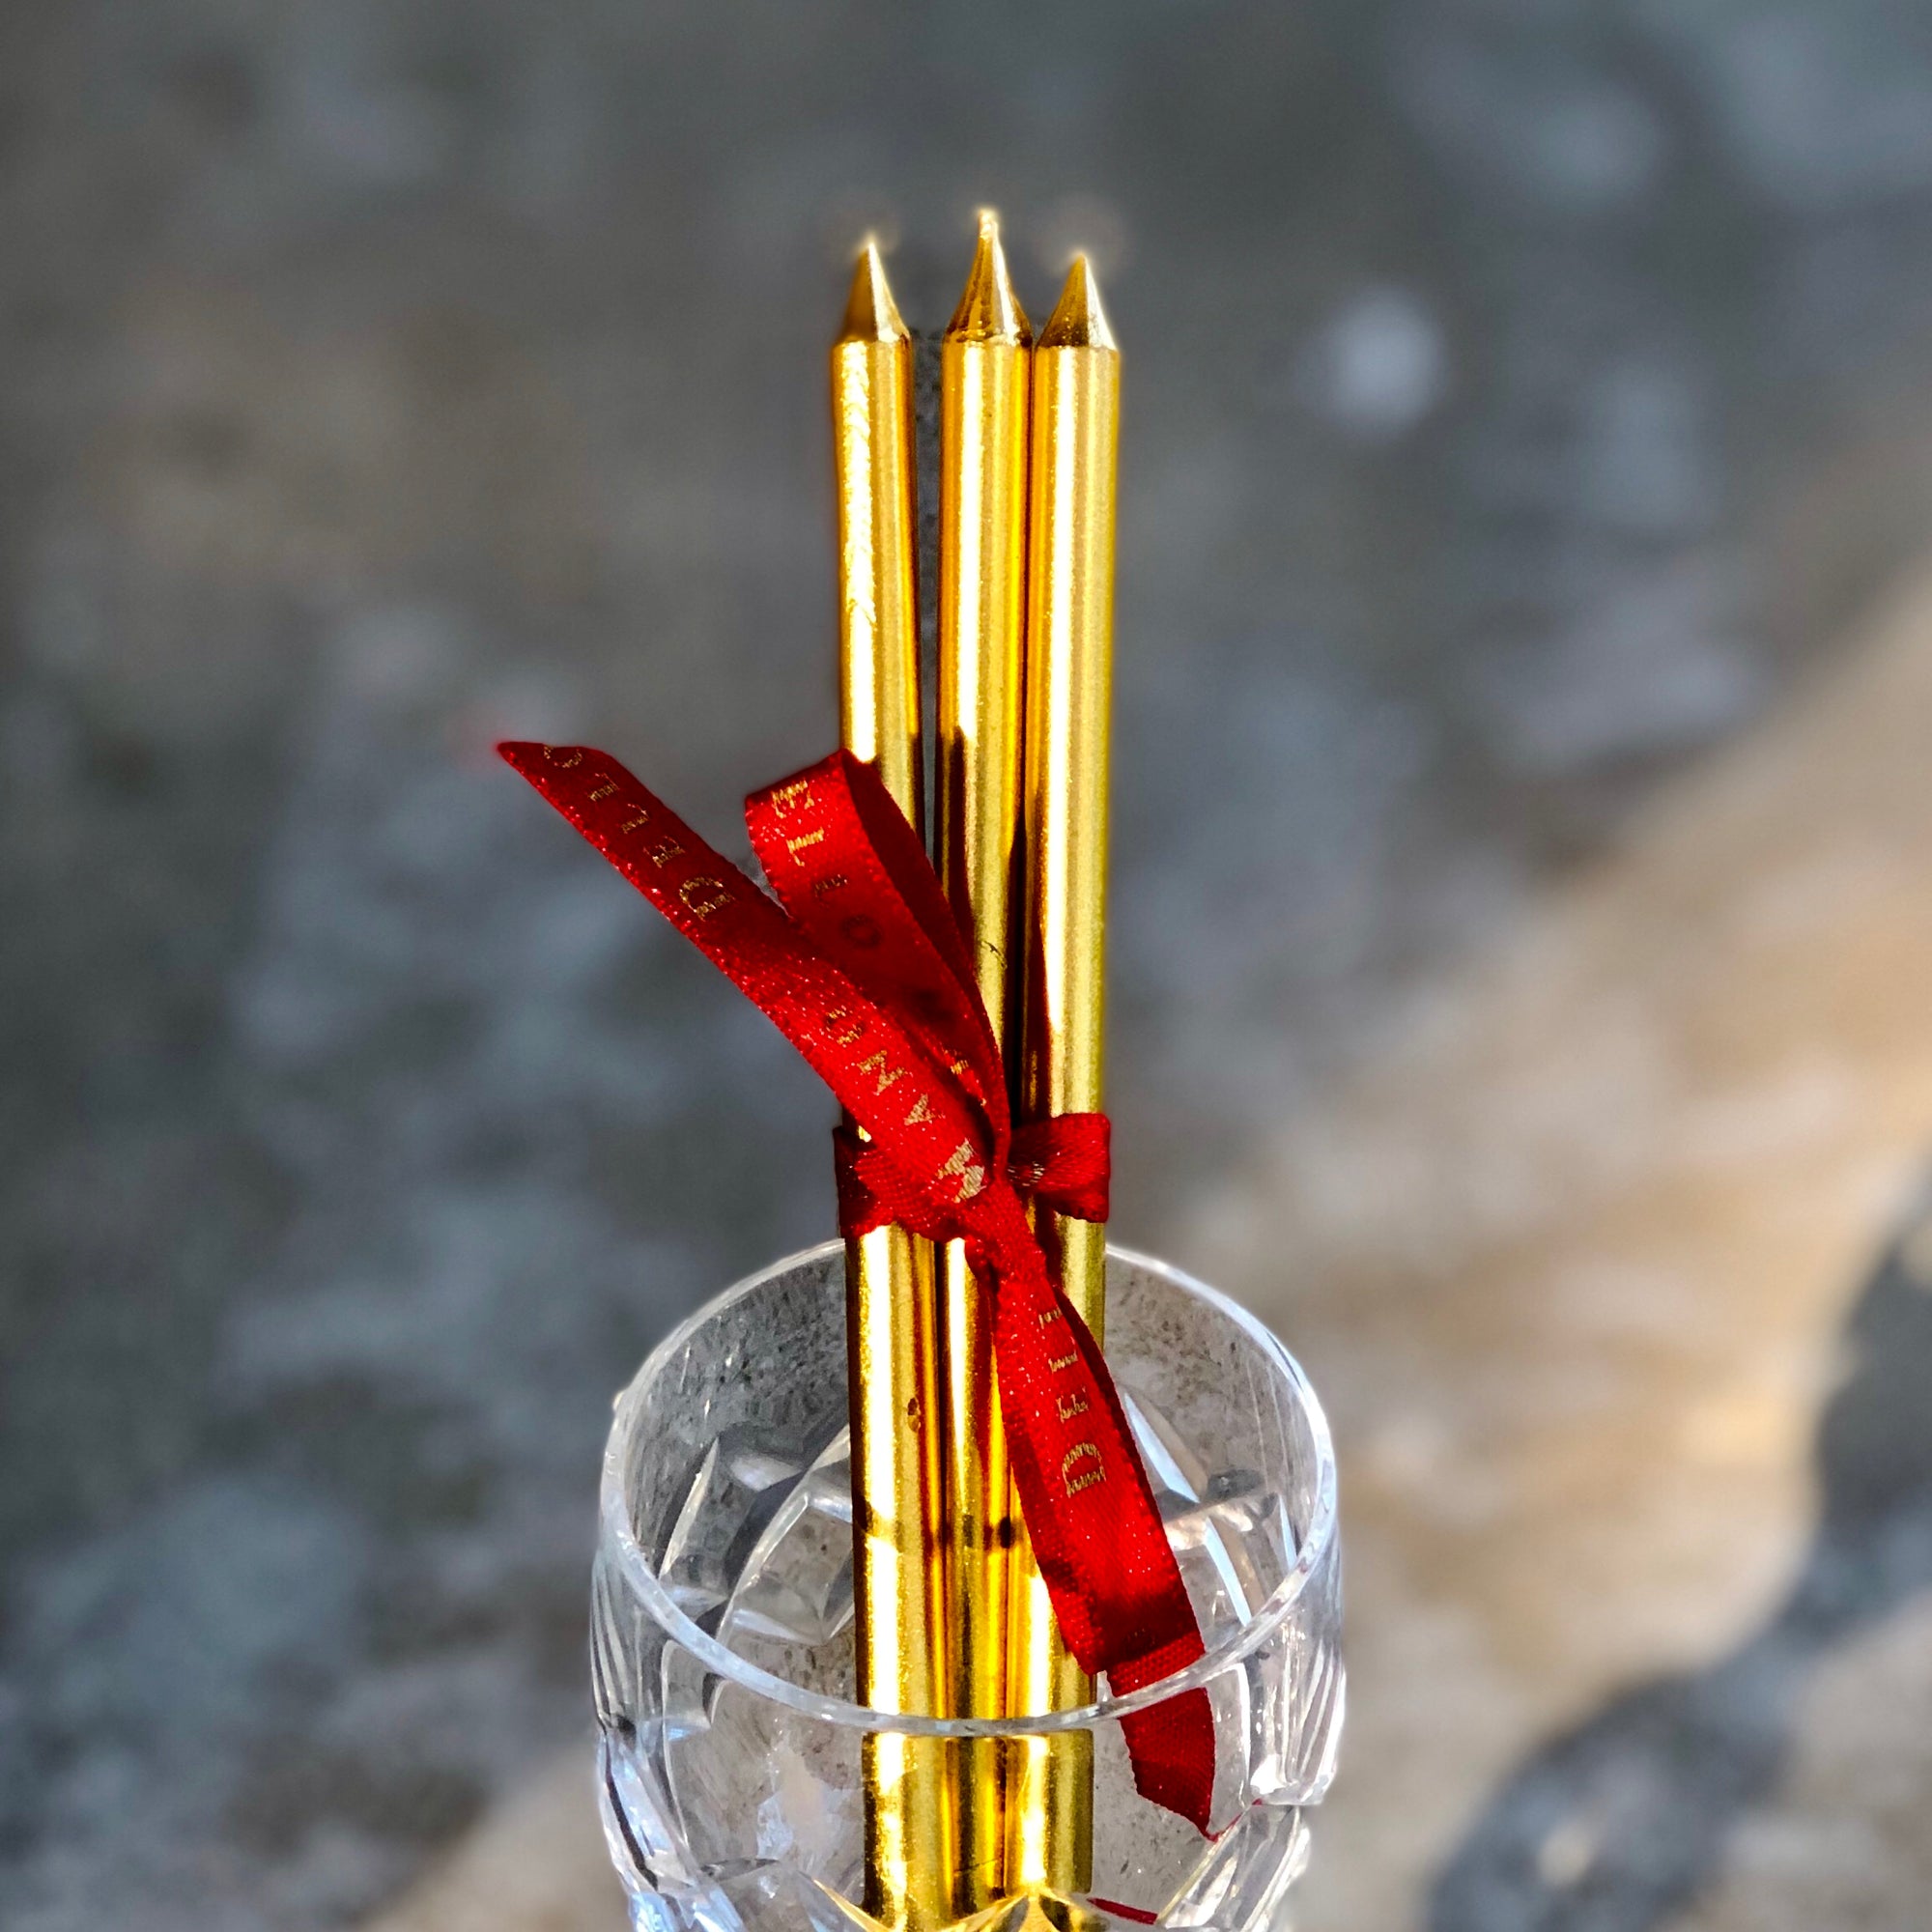 Dello Mano's signature gold candles resting on a red ribbon